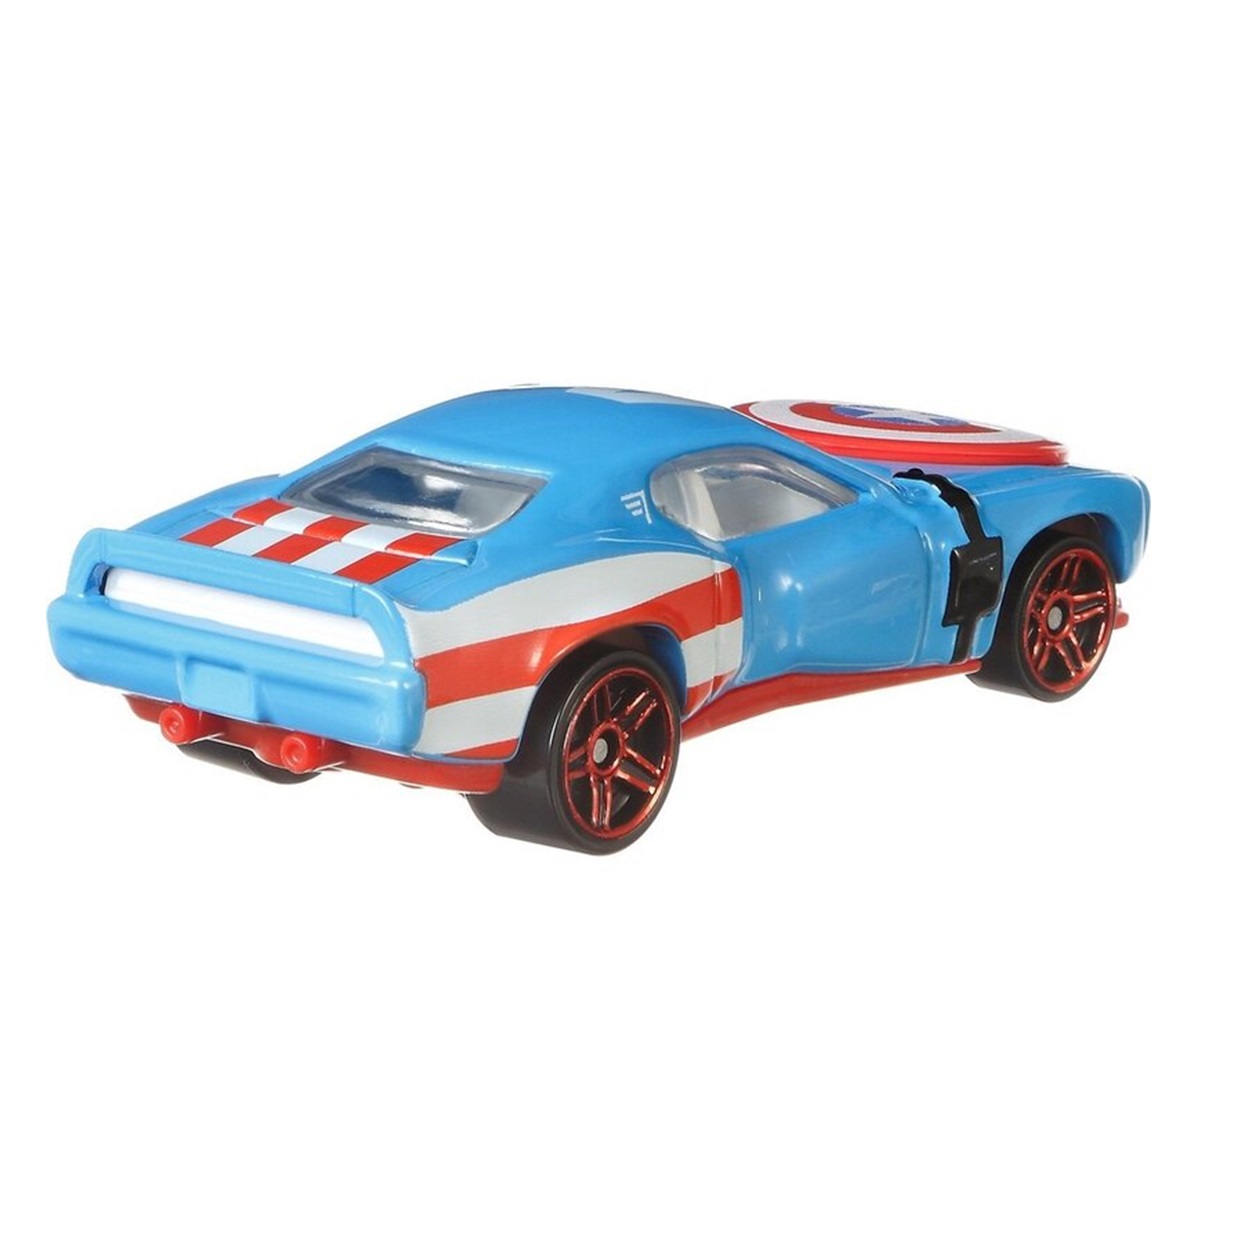 Capitán América Action Feature 2/5 Character Cars Hotwheels 